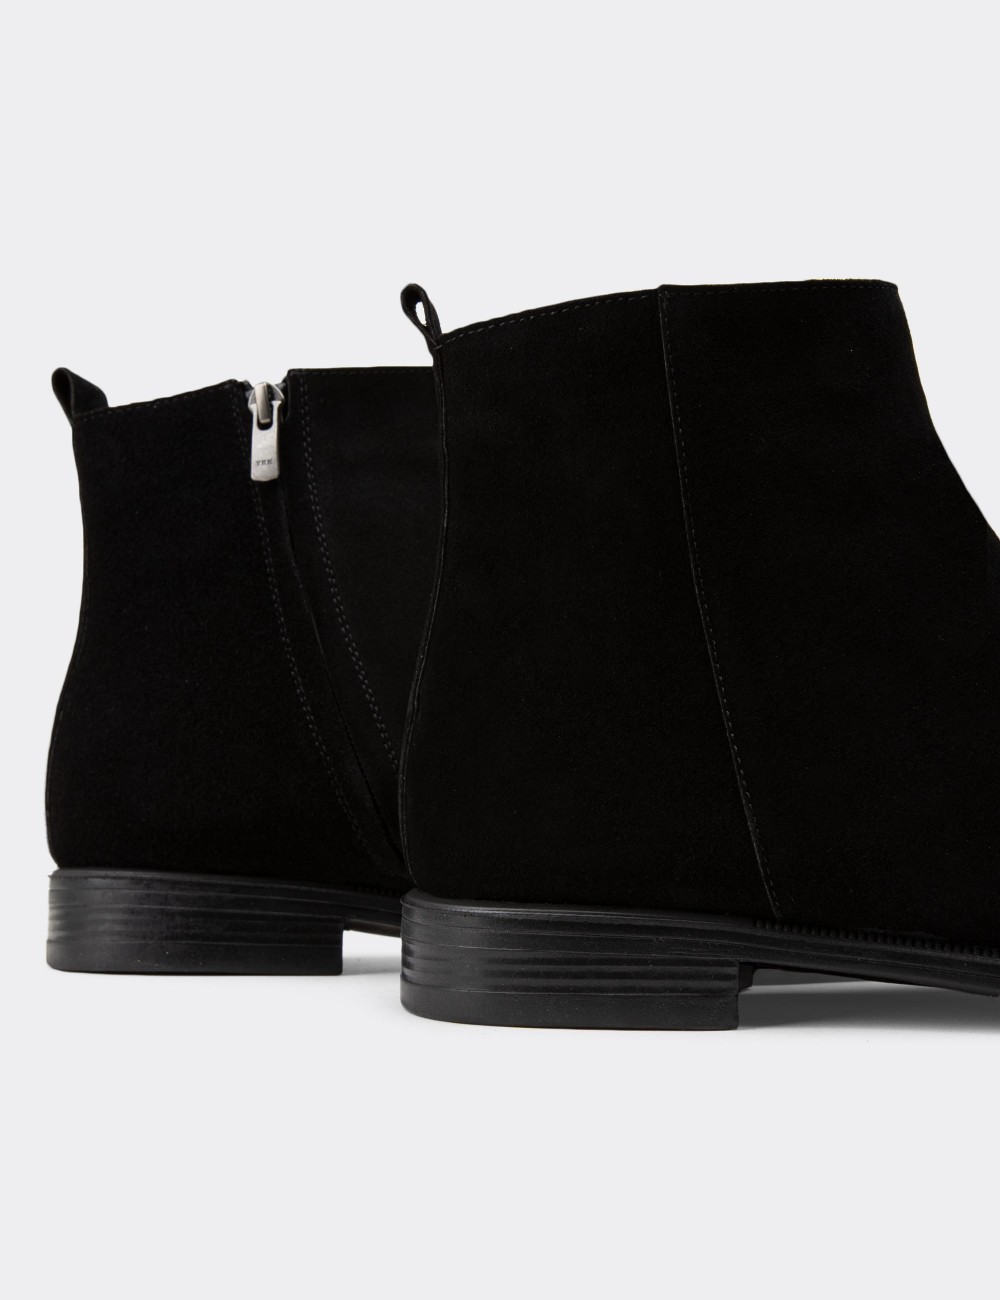 Black Suede Leather Boots - 01921MSYHC02